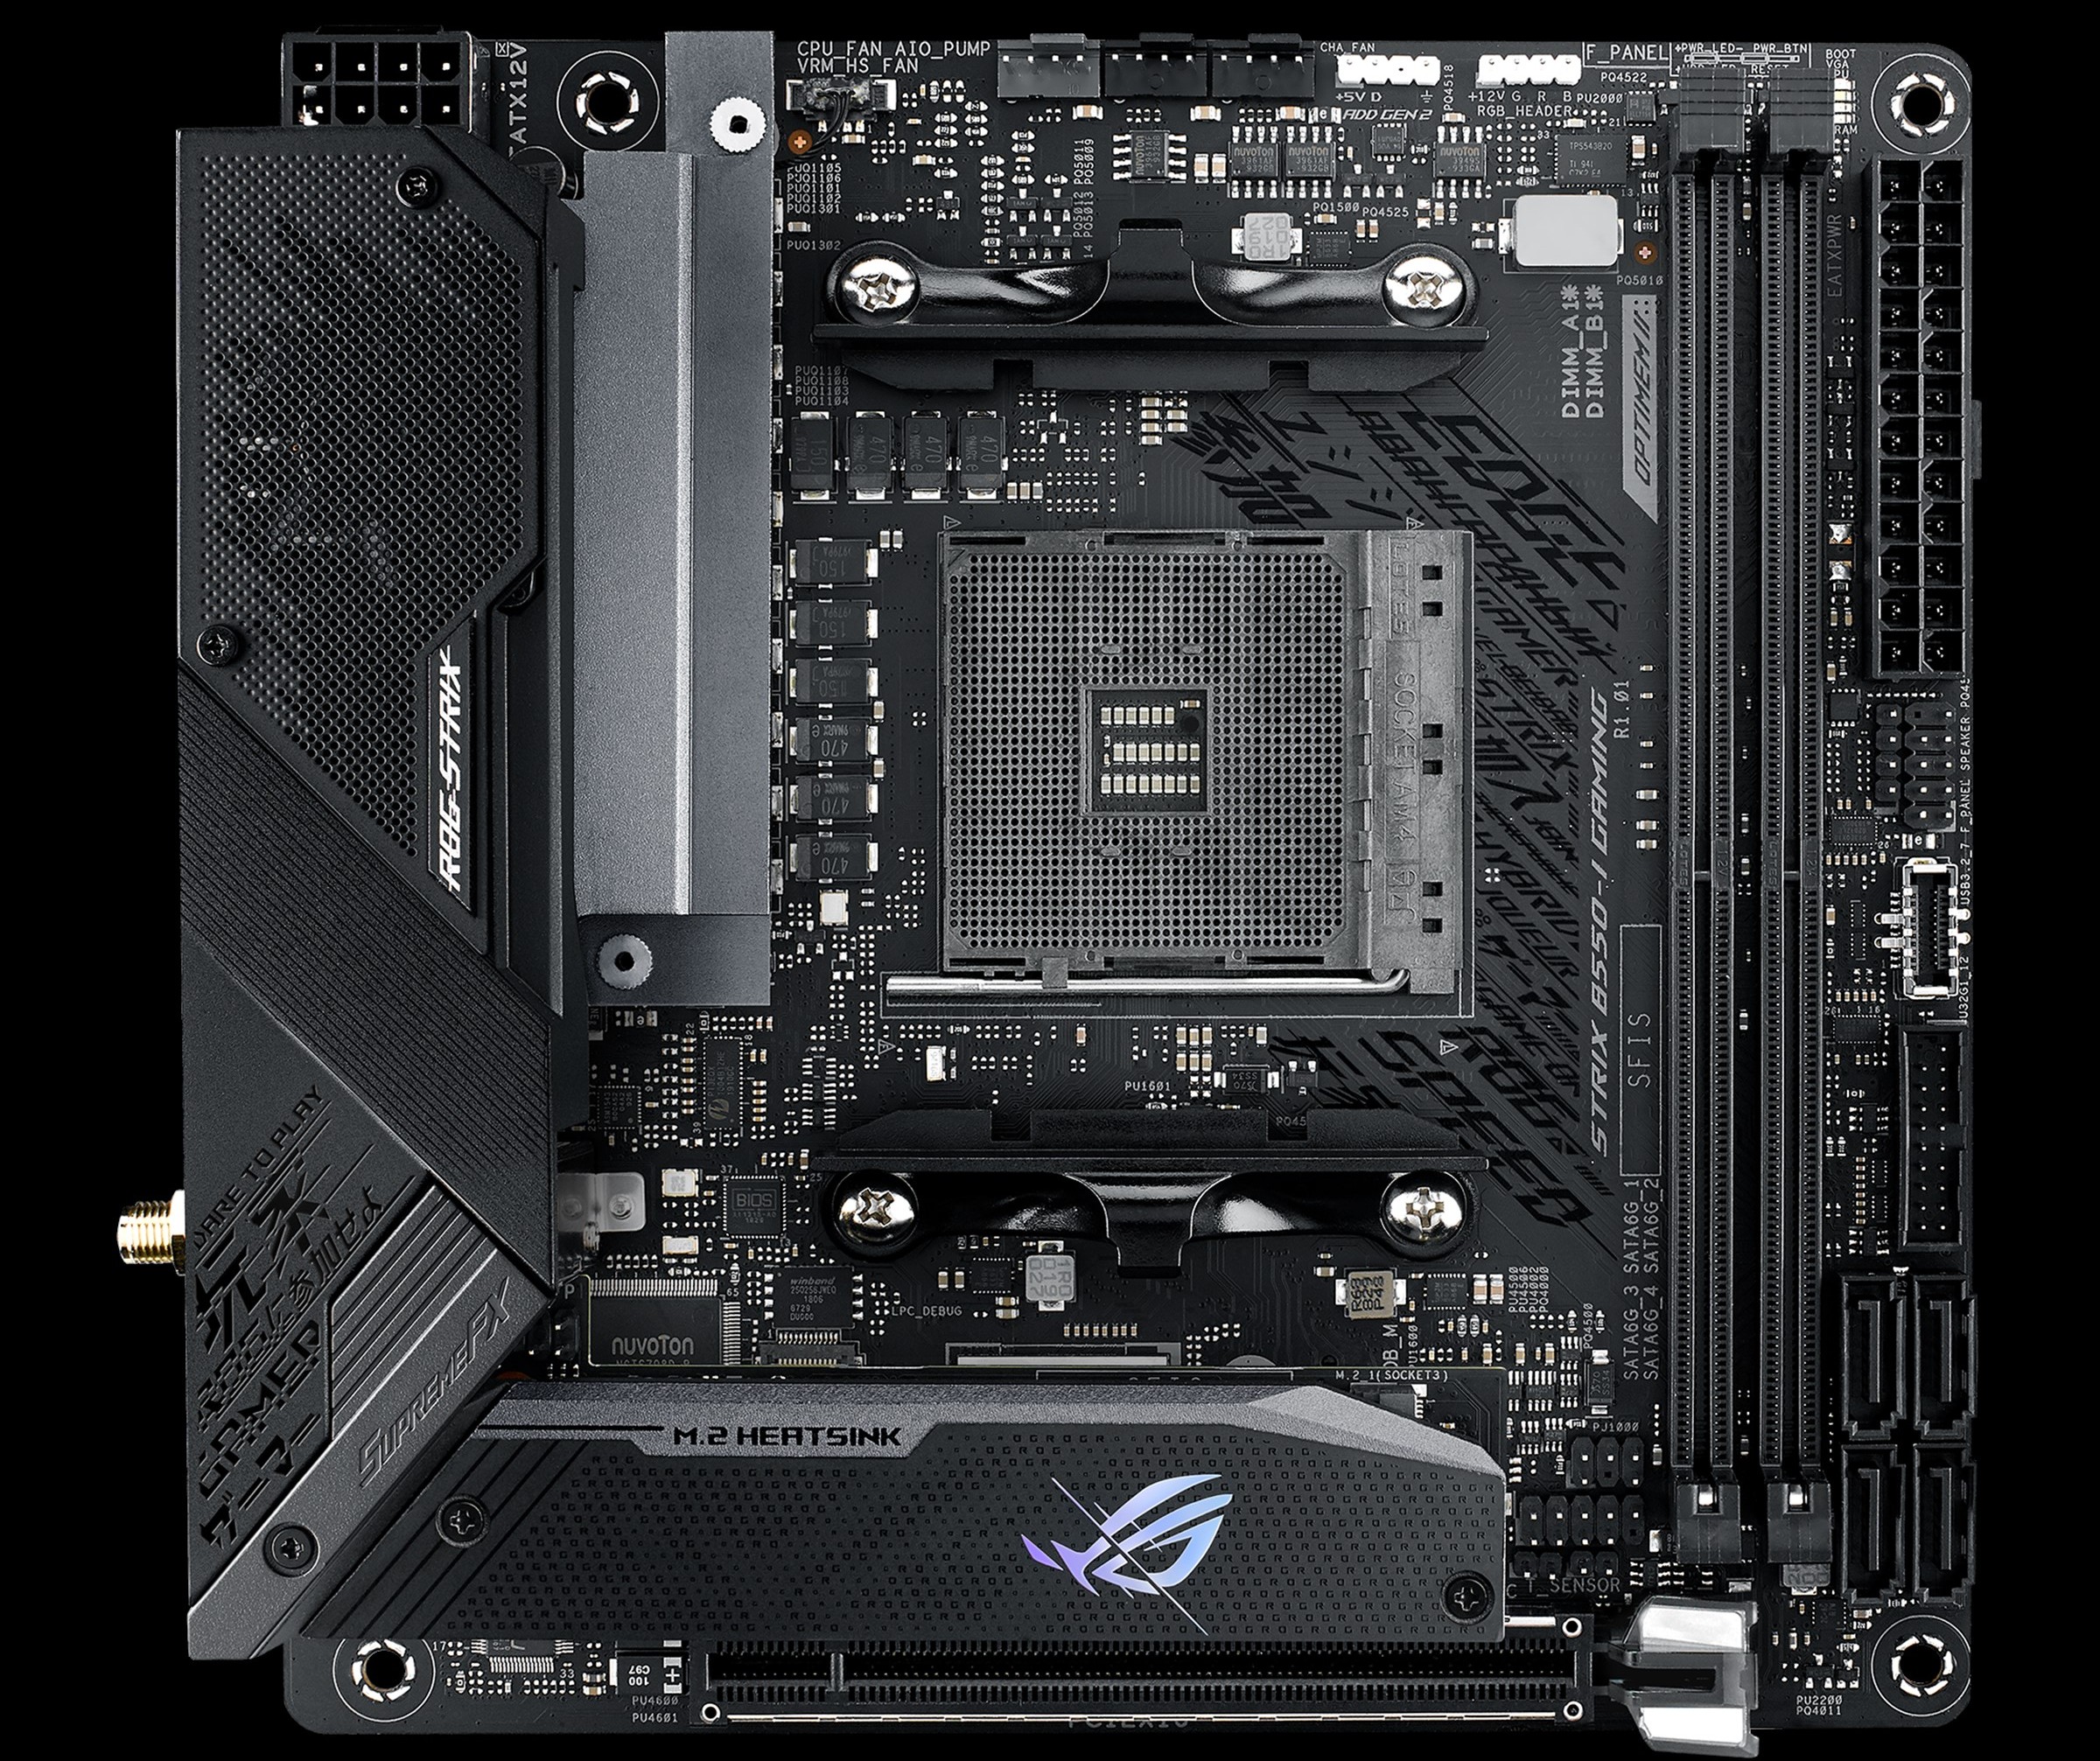 ASUS ROG Strix B550-I Gaming - The AMD B550 Motherboard Overview